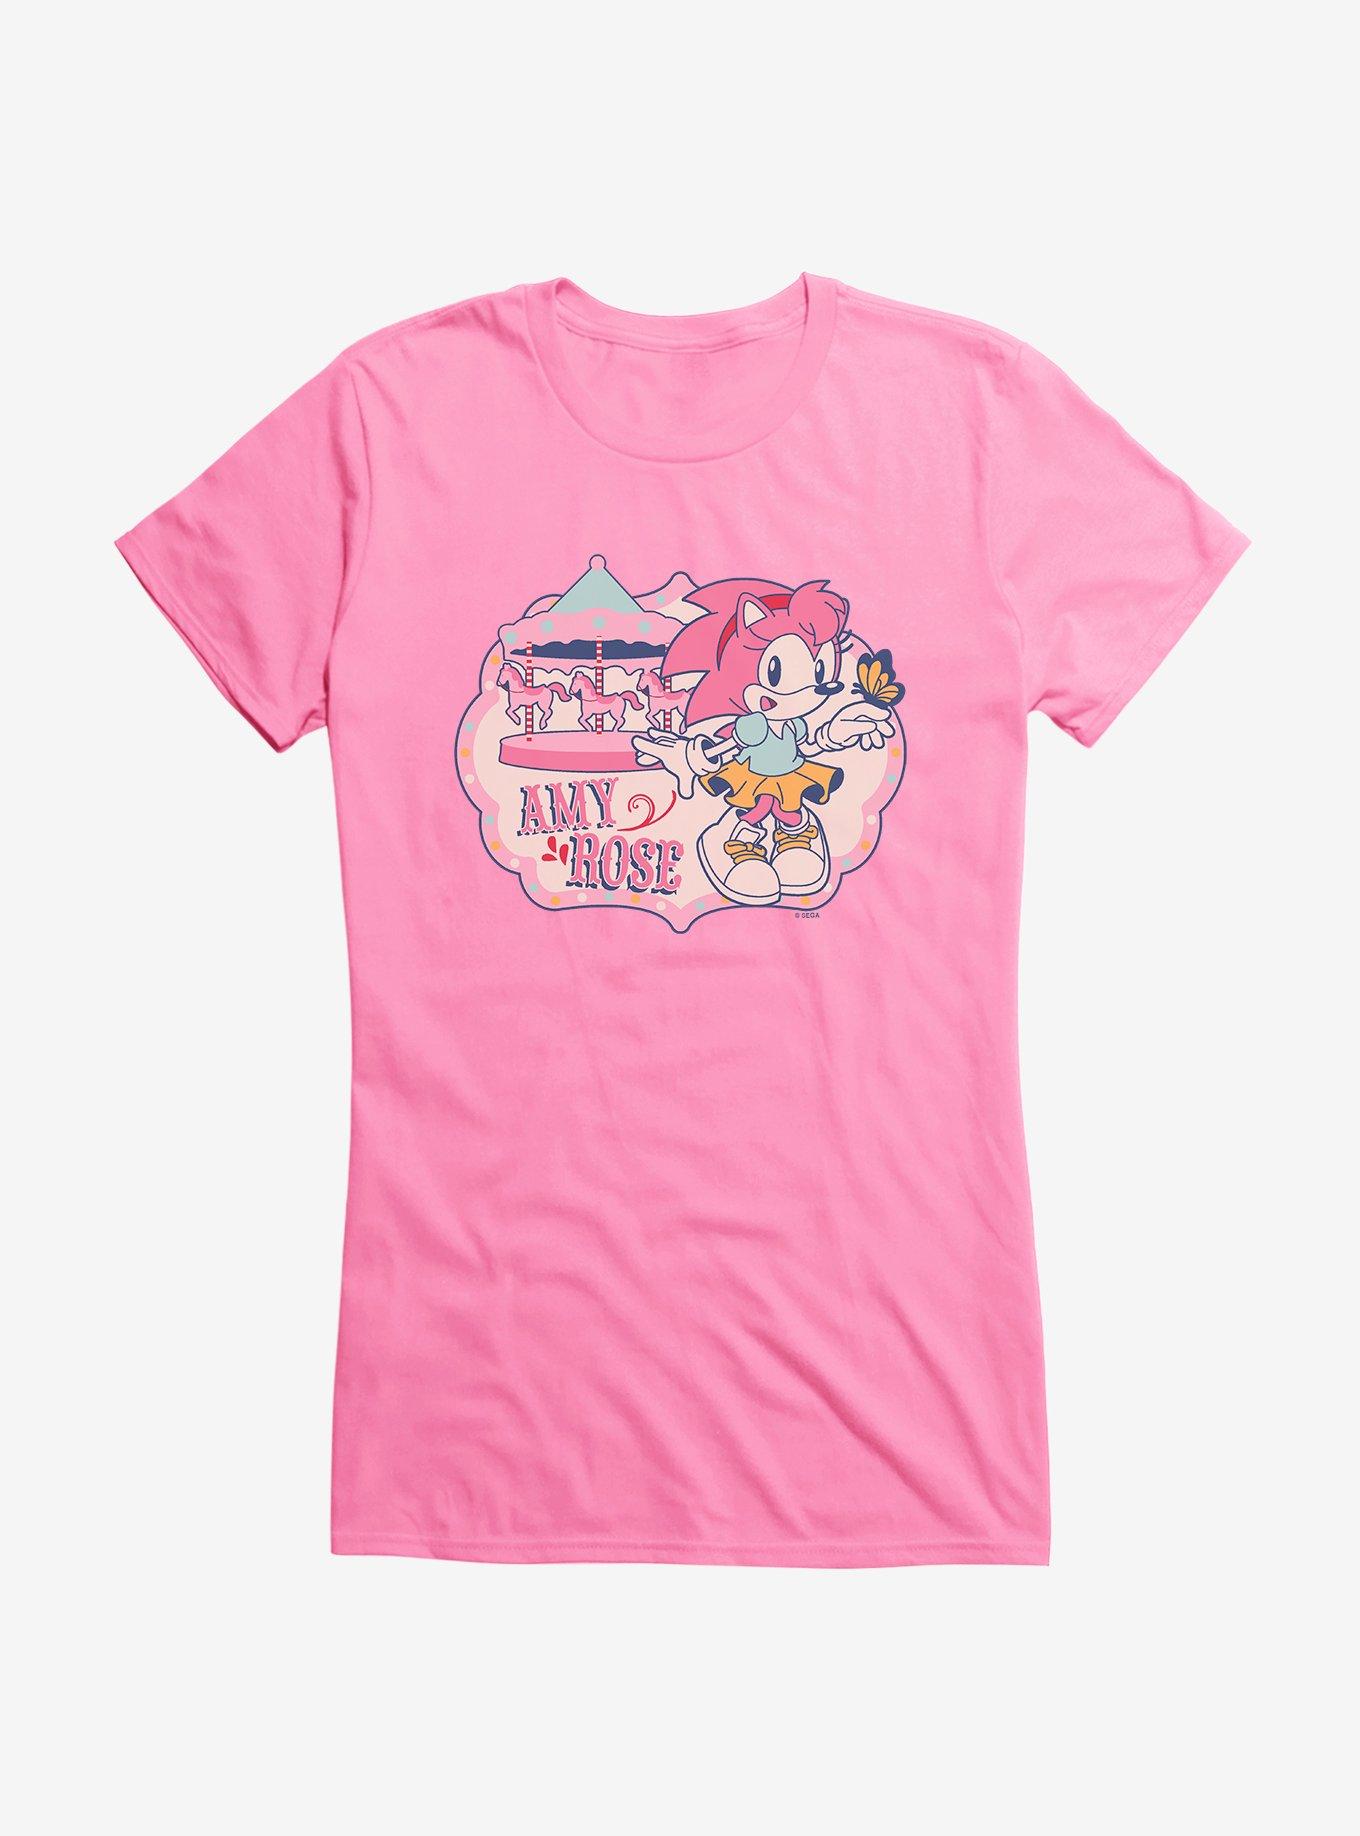 The Amy Rose Girls T-Shirt | Topic